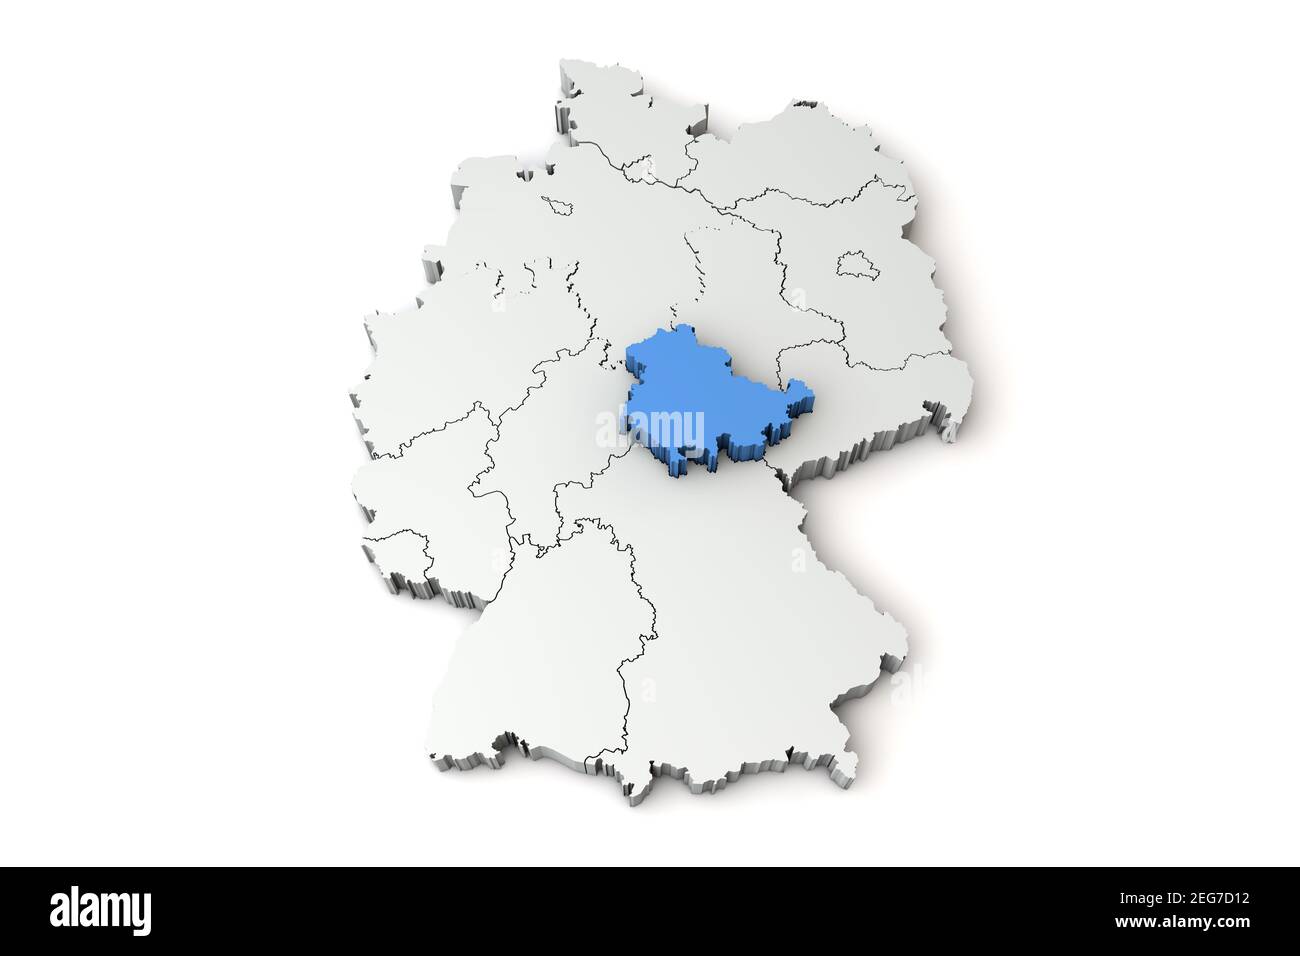 Map of Germany showing Thuringia region. 3D Rendering Stock Photo